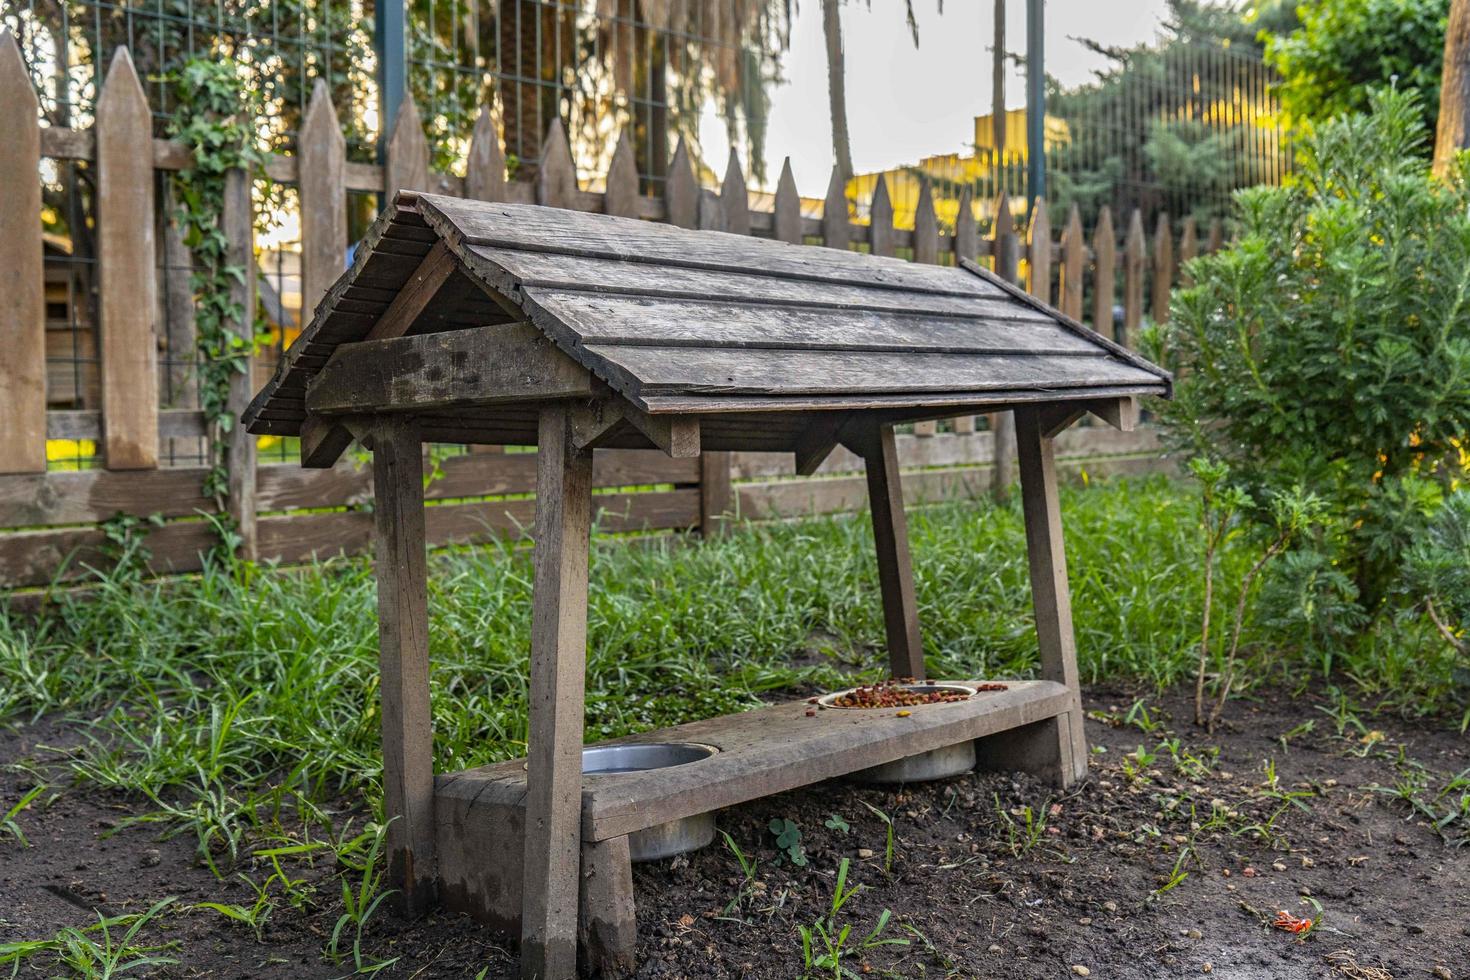 wooden cat house in the garden photo